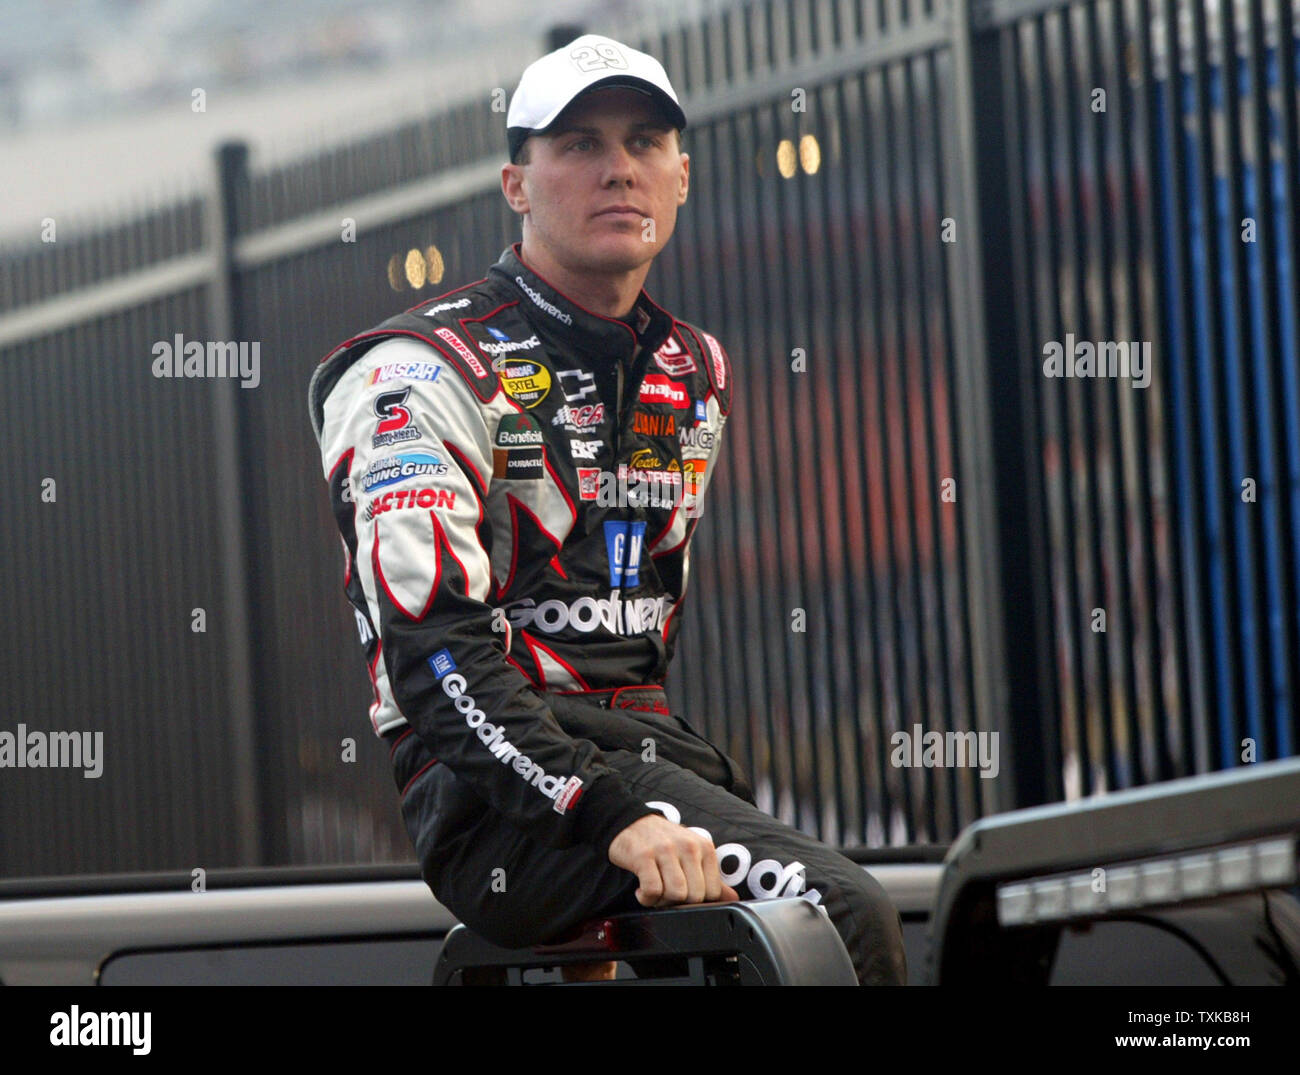 Kevin Harvick, driver of the GM Goodwrench Chevrolet, watches qualifying for the NASCAR Nextel All-Star Challenge at Lowe's Motor Speedway in Concord, NC on May 20, 2005.  (UPI Photo/Nell Redmond) Stock Photo